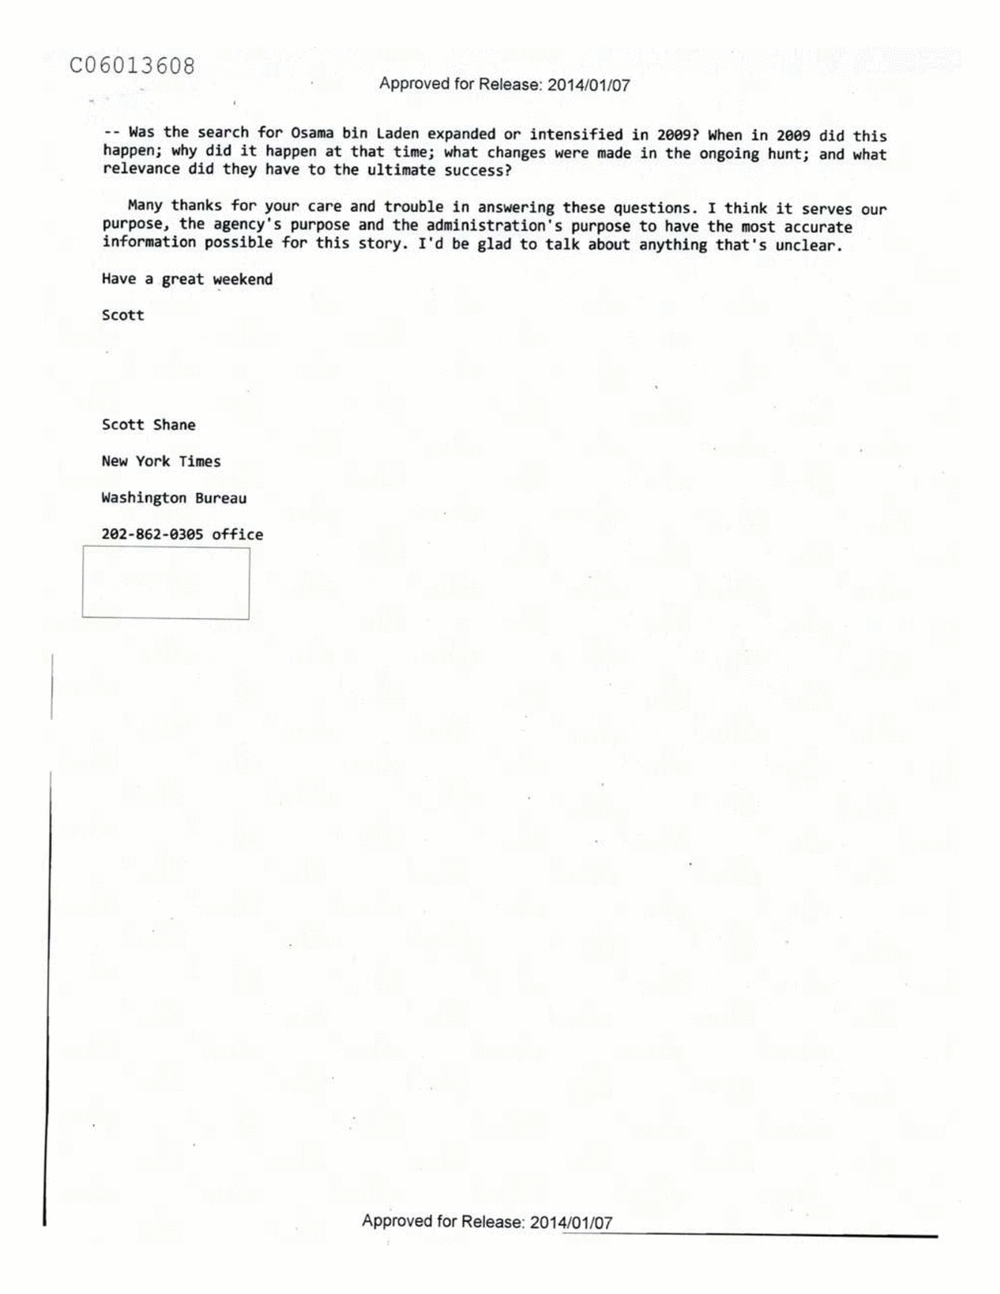 Page 422 from Email Correspondence Between Reporters and CIA Flacks